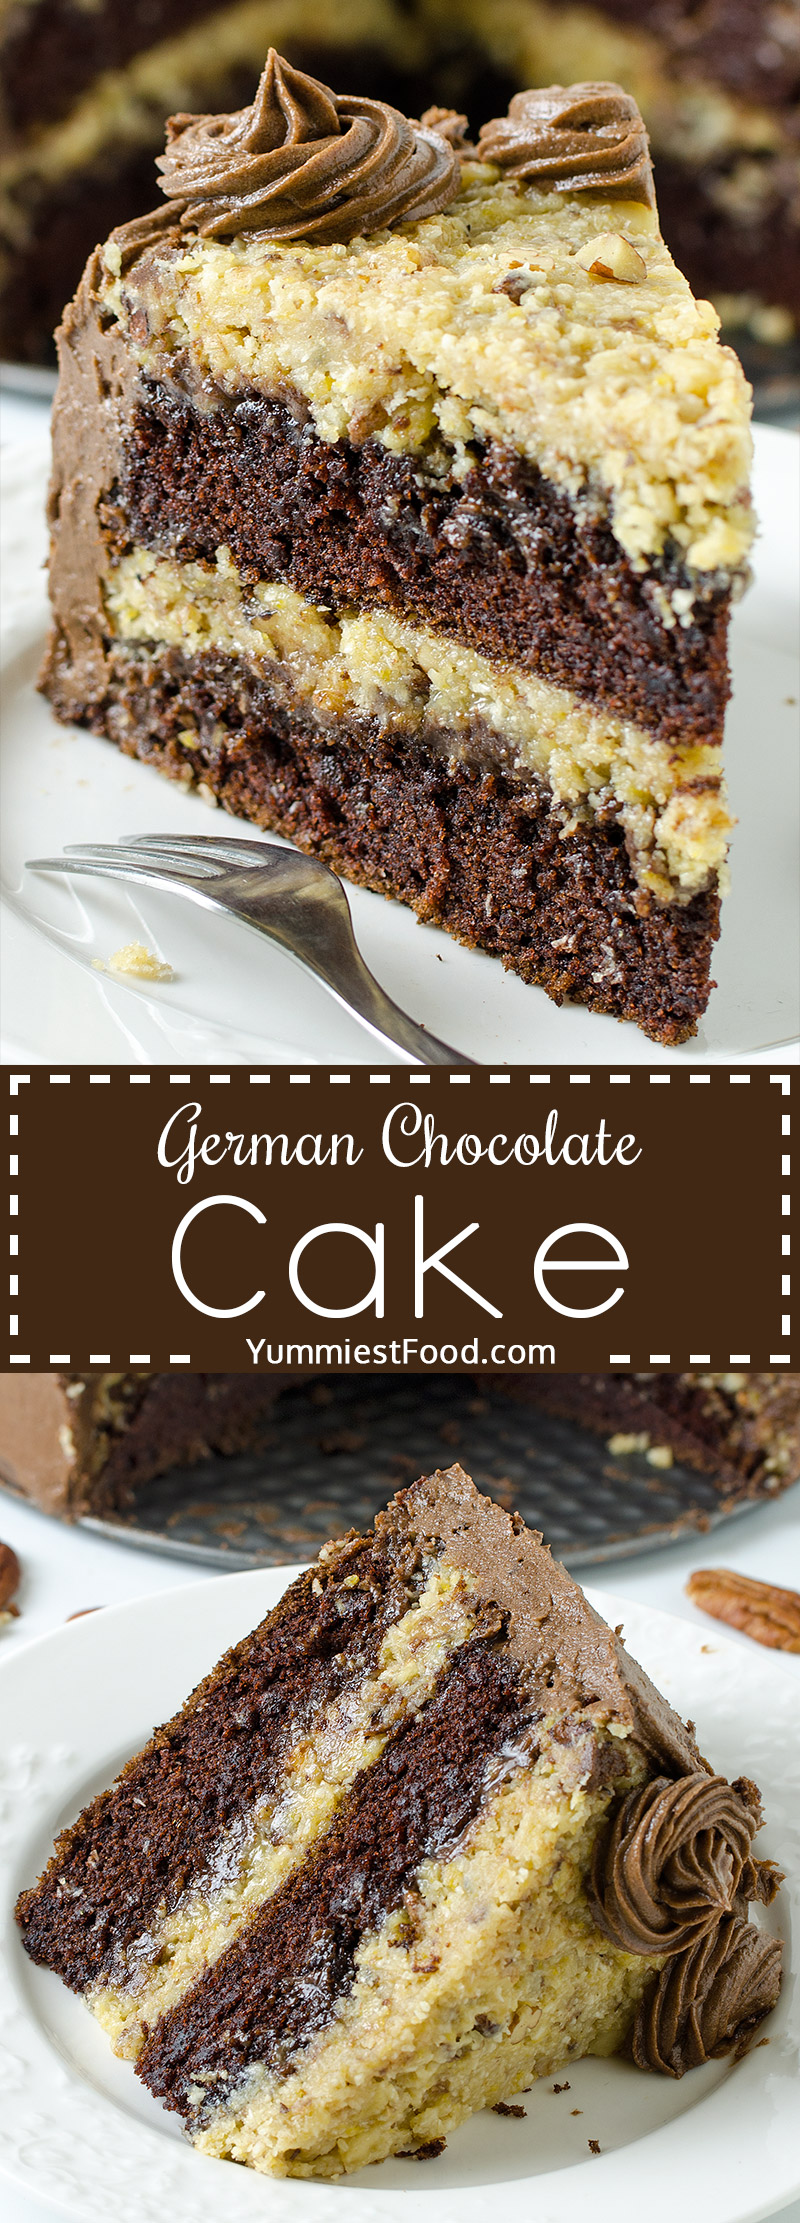 GERMAN CHOCOLATE CAKE - The Best Homemade German Chocolate Cake is wonderfully delicious combination of chocolate cake, coconut and pecans